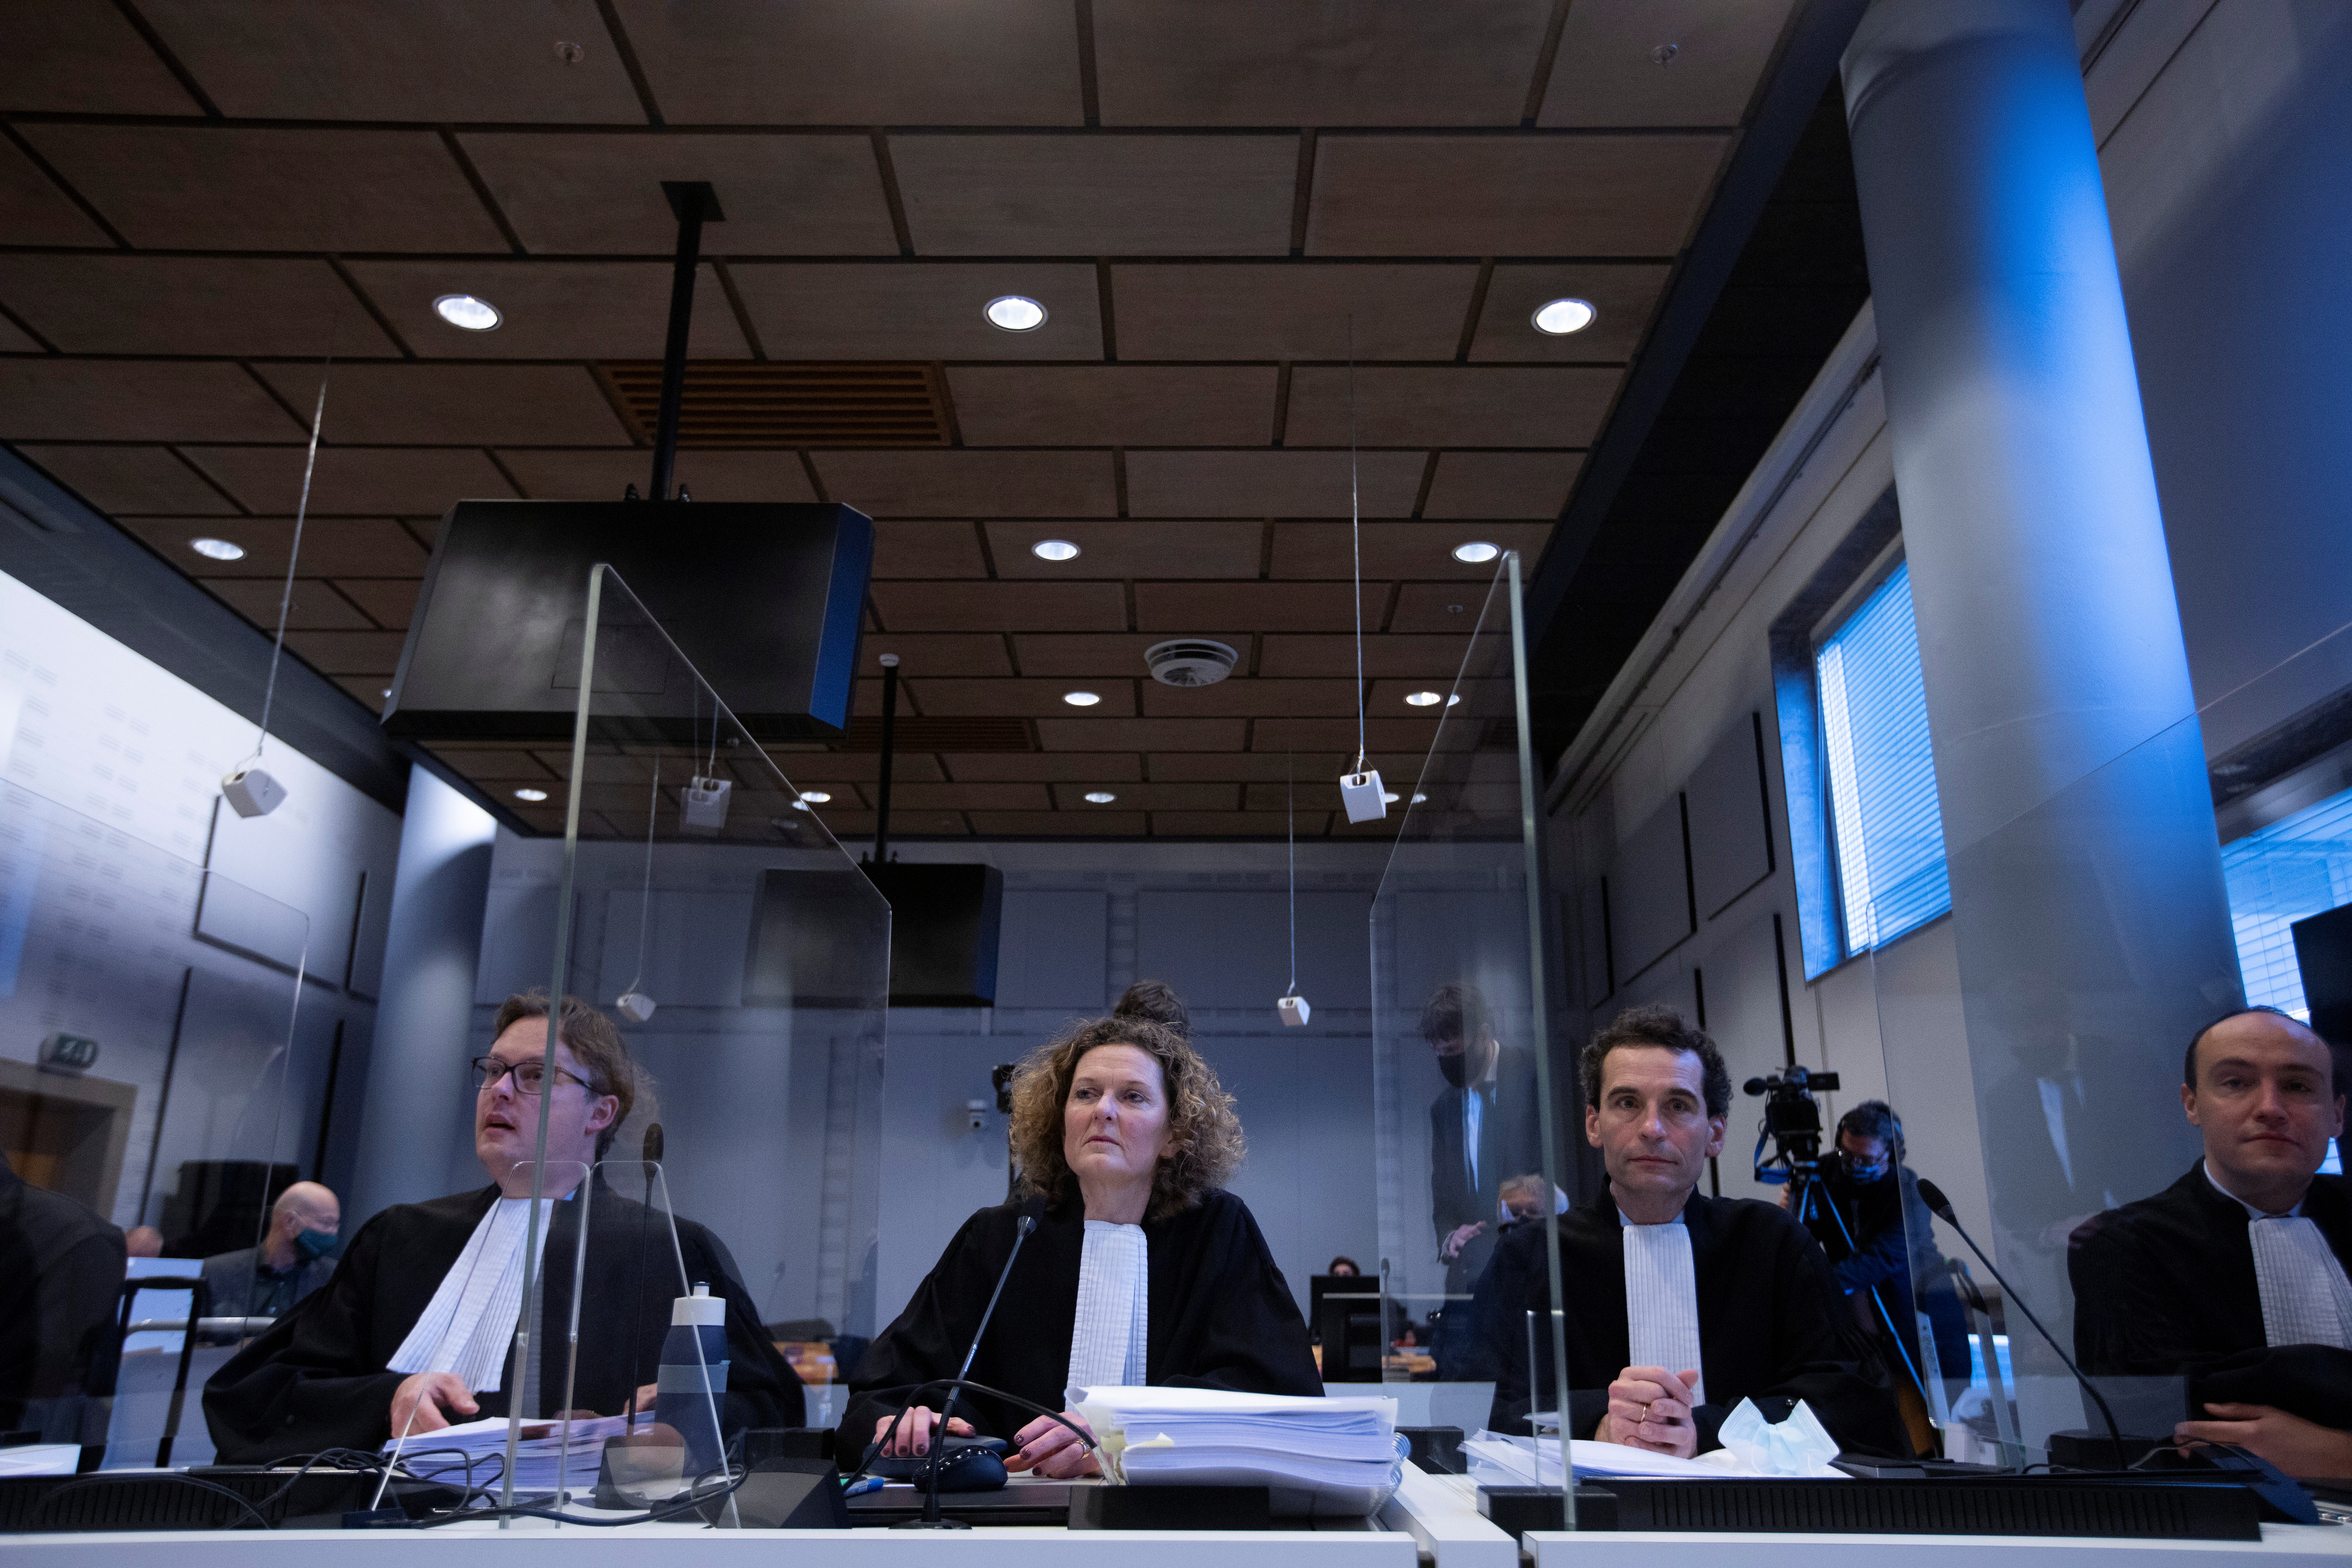 Lawyers for Shell take their seats at the start of the court case environmentalist and human rights groups have brought on against Royal Dutch Shell to force the energy firm to cut its reliance on fossil fuels, in The Hague, Netherlands December 1, 2020. Peter Dejong/Pool via REUTERS